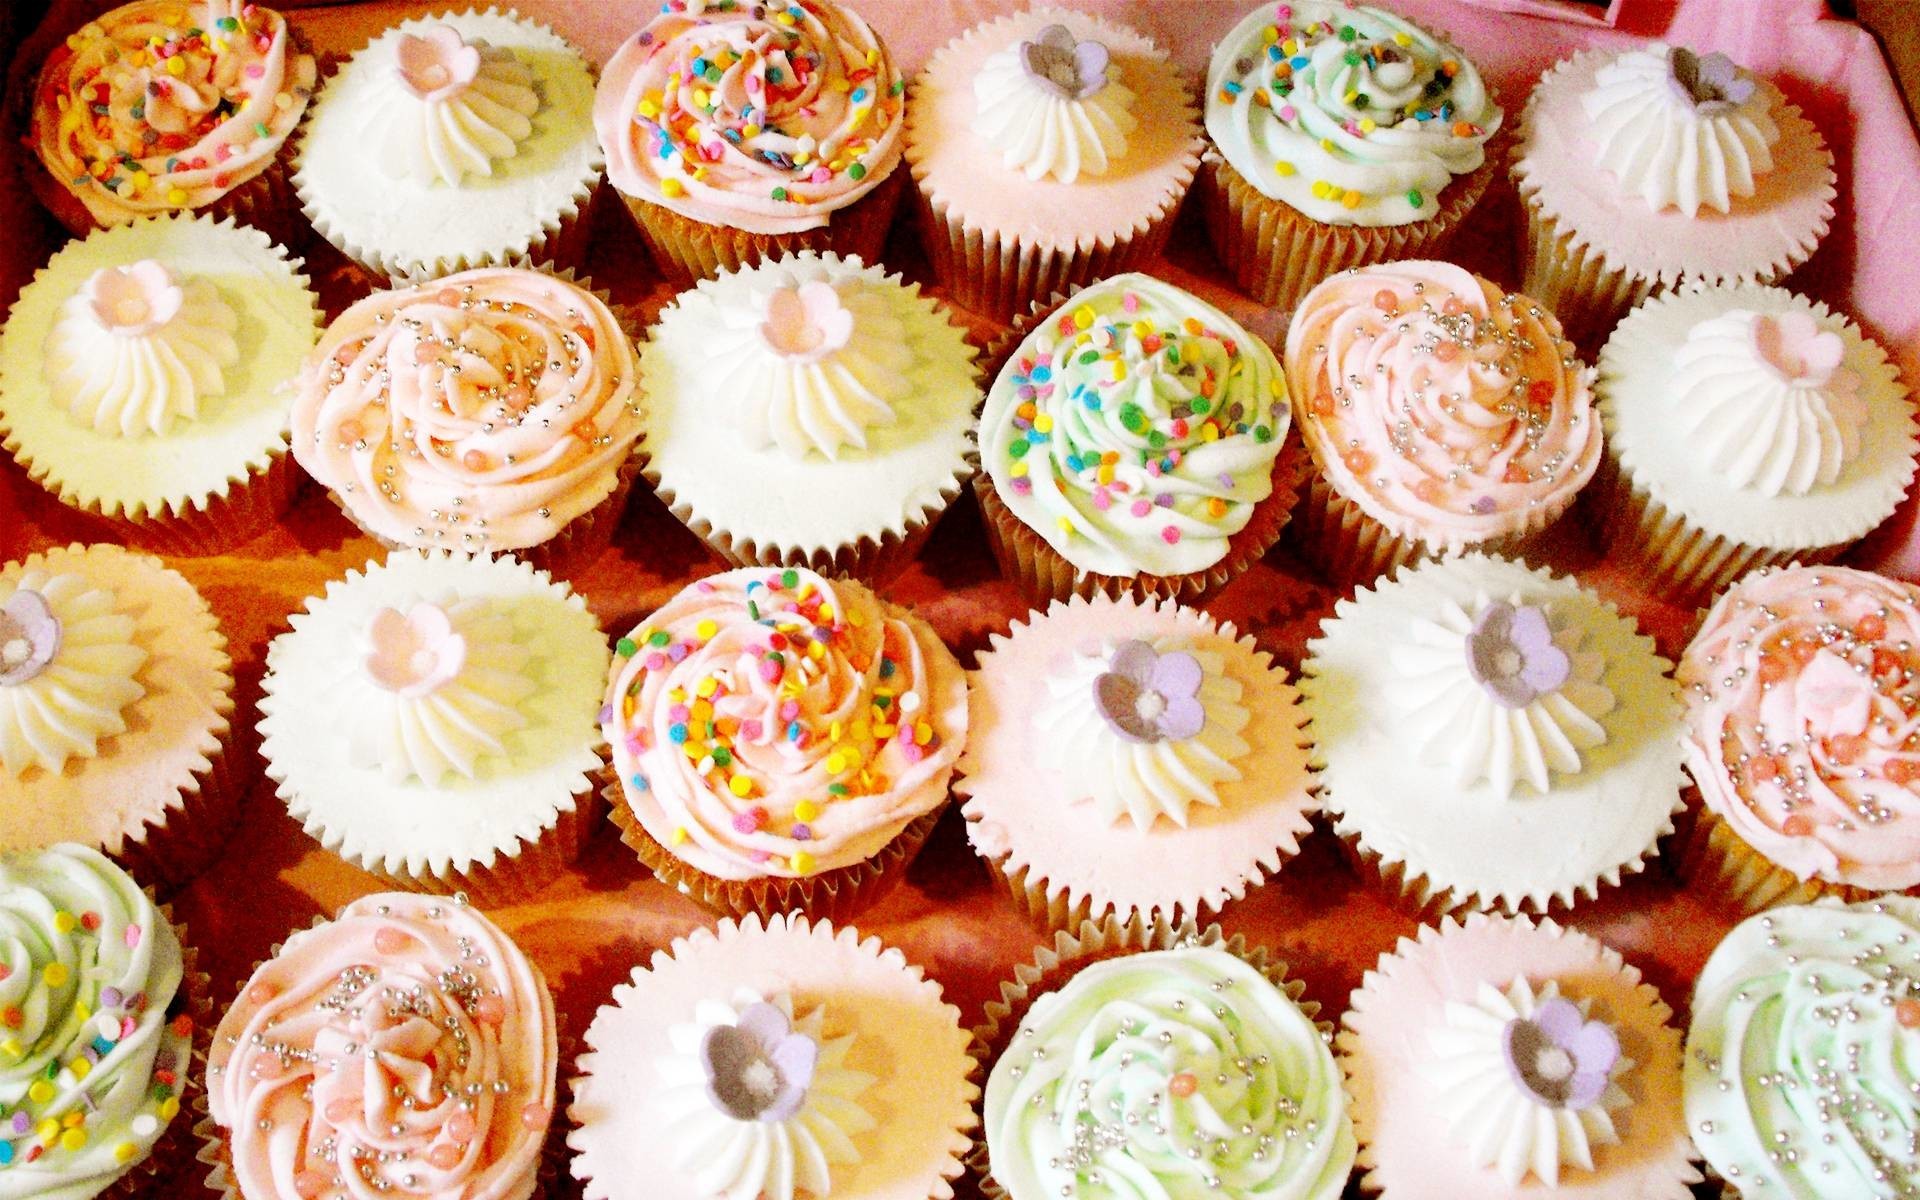 1920x1200  30 Cupcake Wallpapers and Desktop Backgrounds | Solo Foods